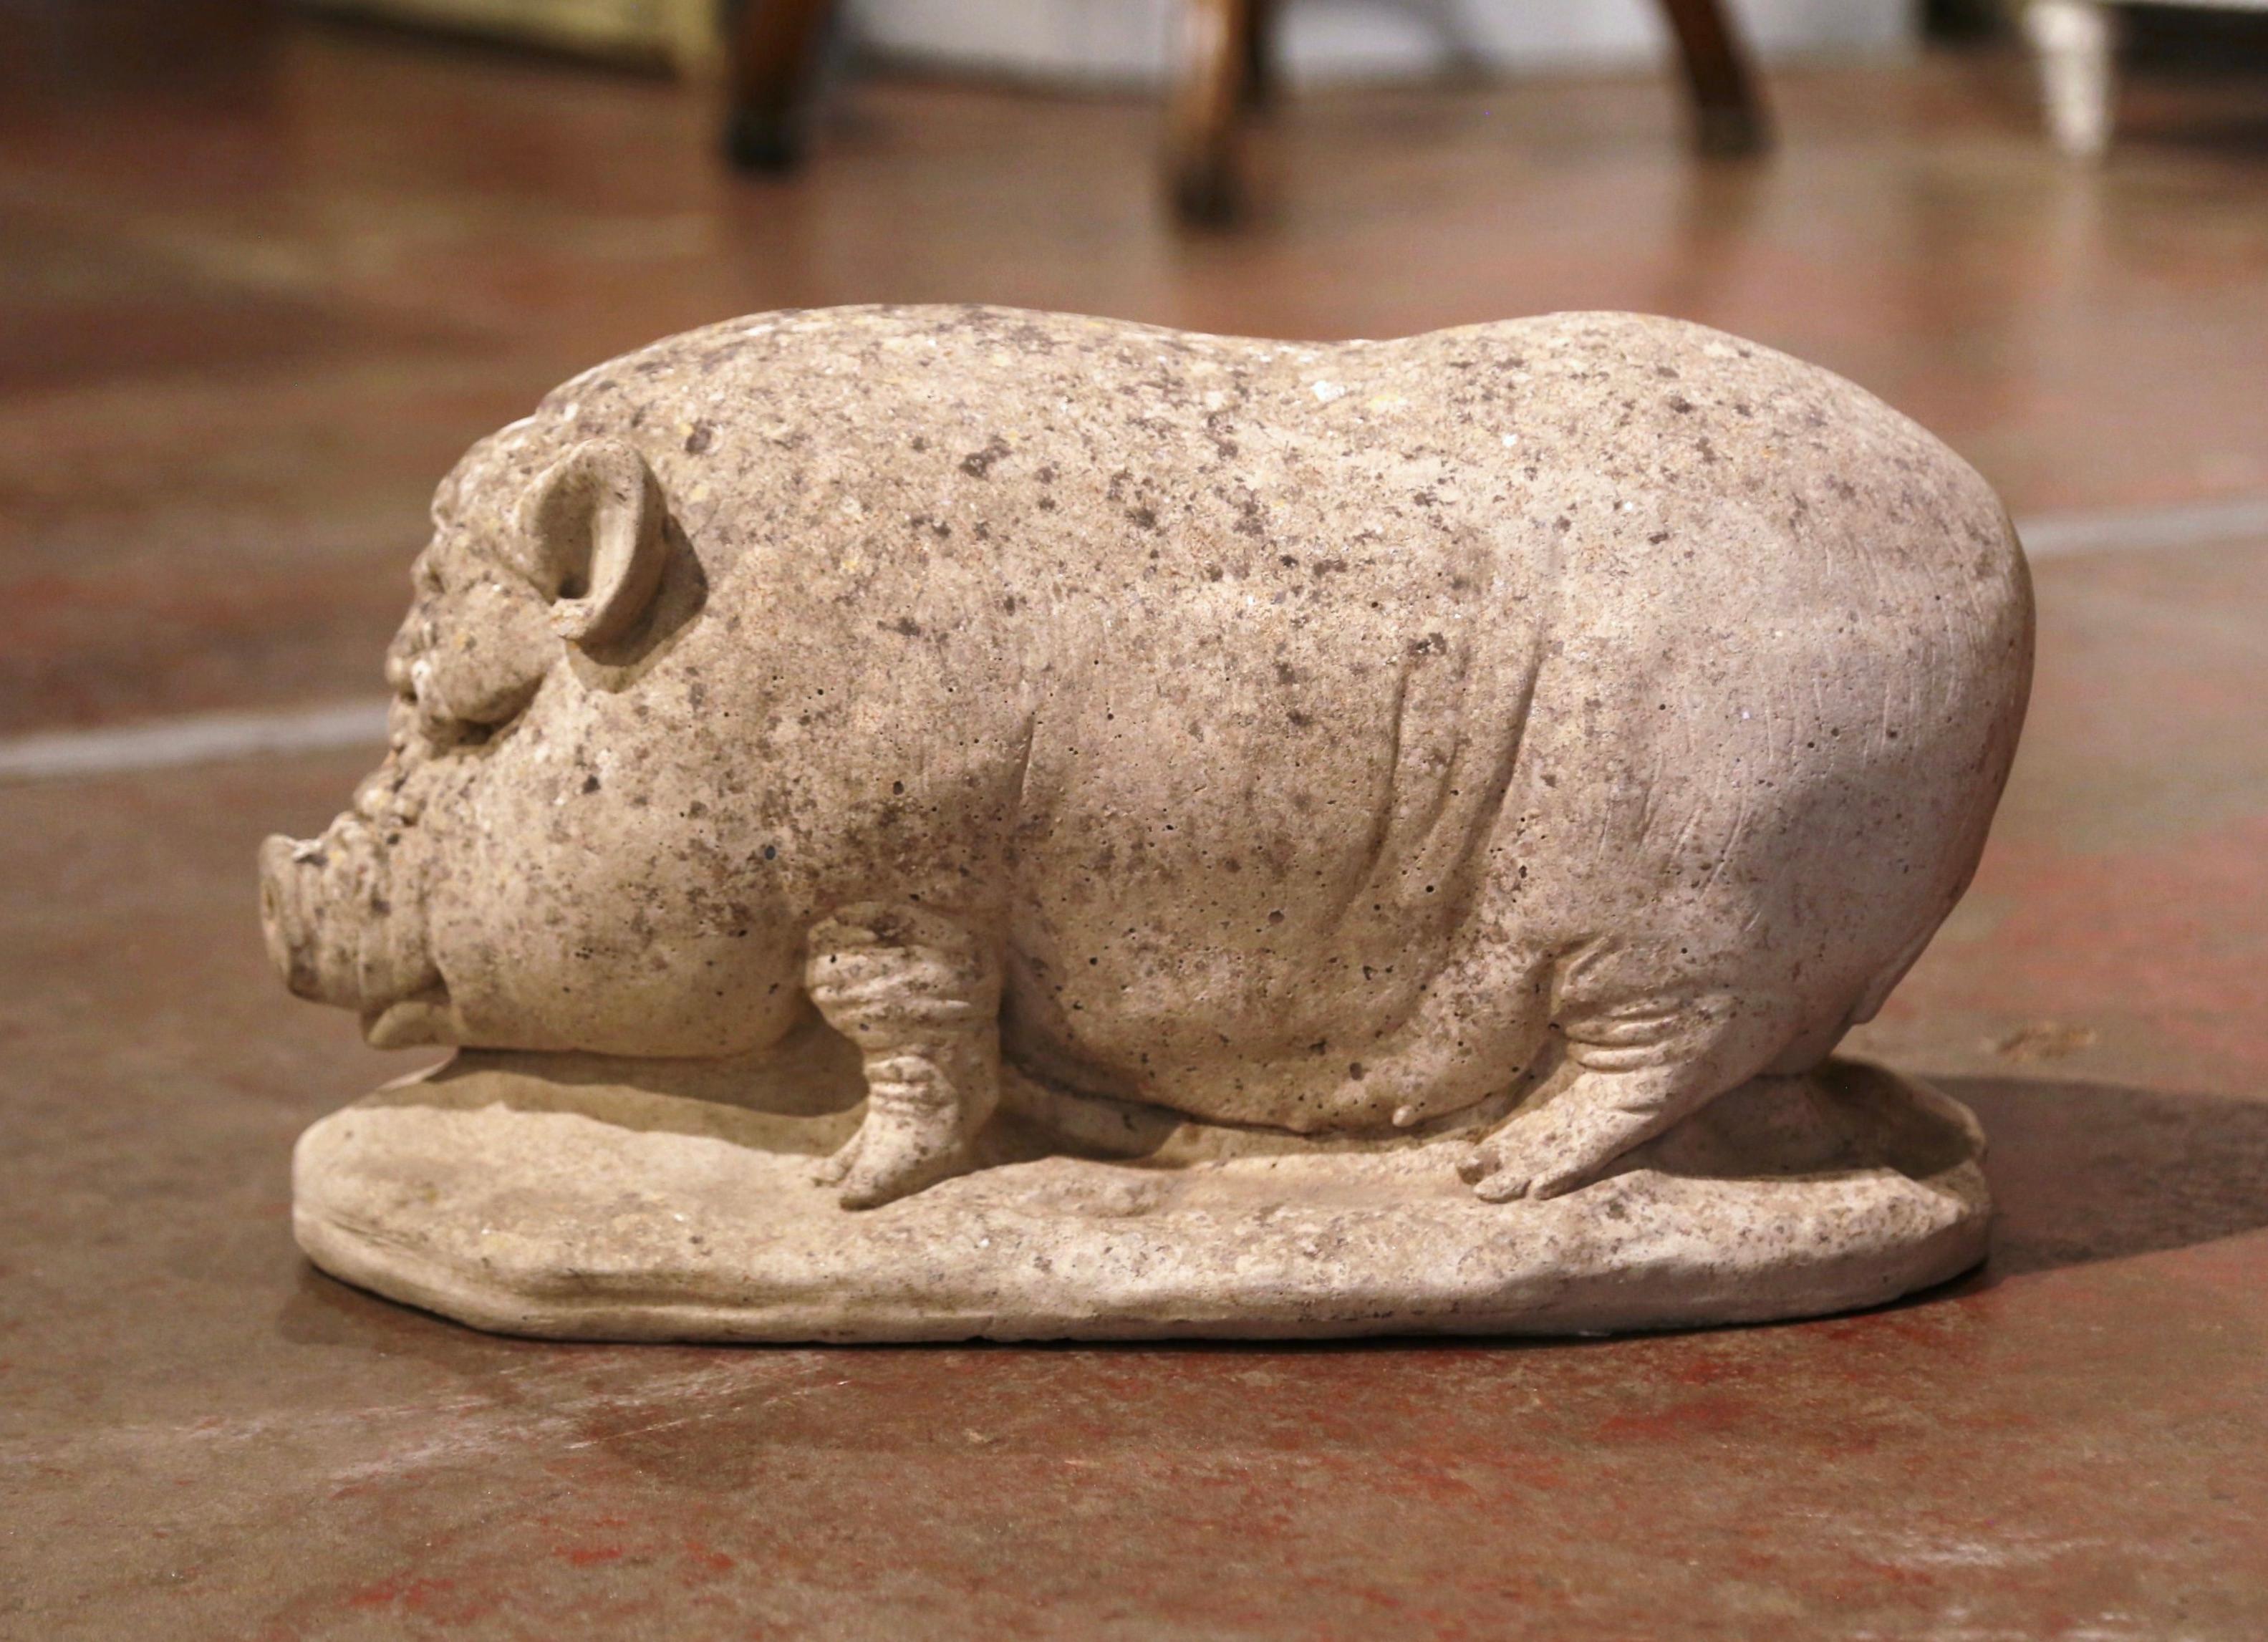 Decorate a kitchen counter or a patio with this antique pig sculpture. Carved of concrete in France circa 1920, the sculpture features a cheerful sow standing on an oval base. The heavy pig composition is in excellent condition and adorns a rich